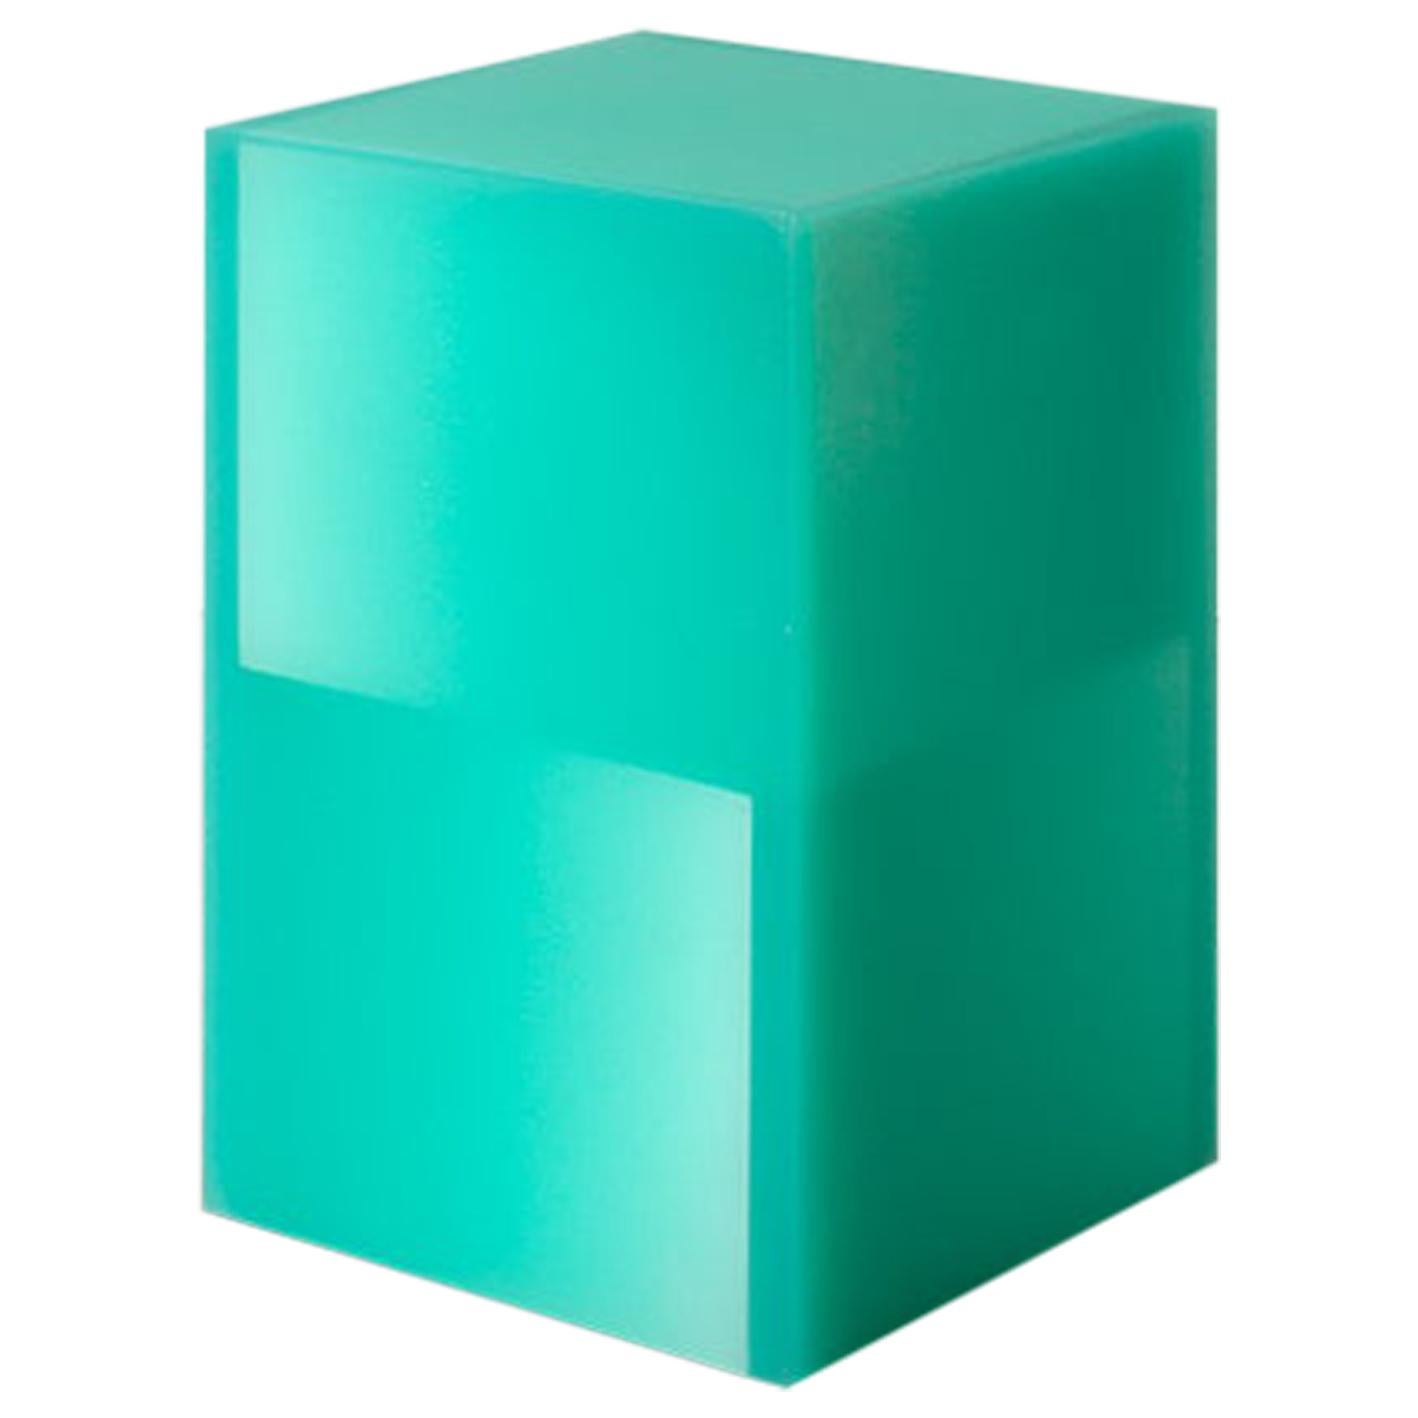 Two Way Shift Resin Side Table/Stool Turquoise by Facture REP by Tuleste Factory For Sale